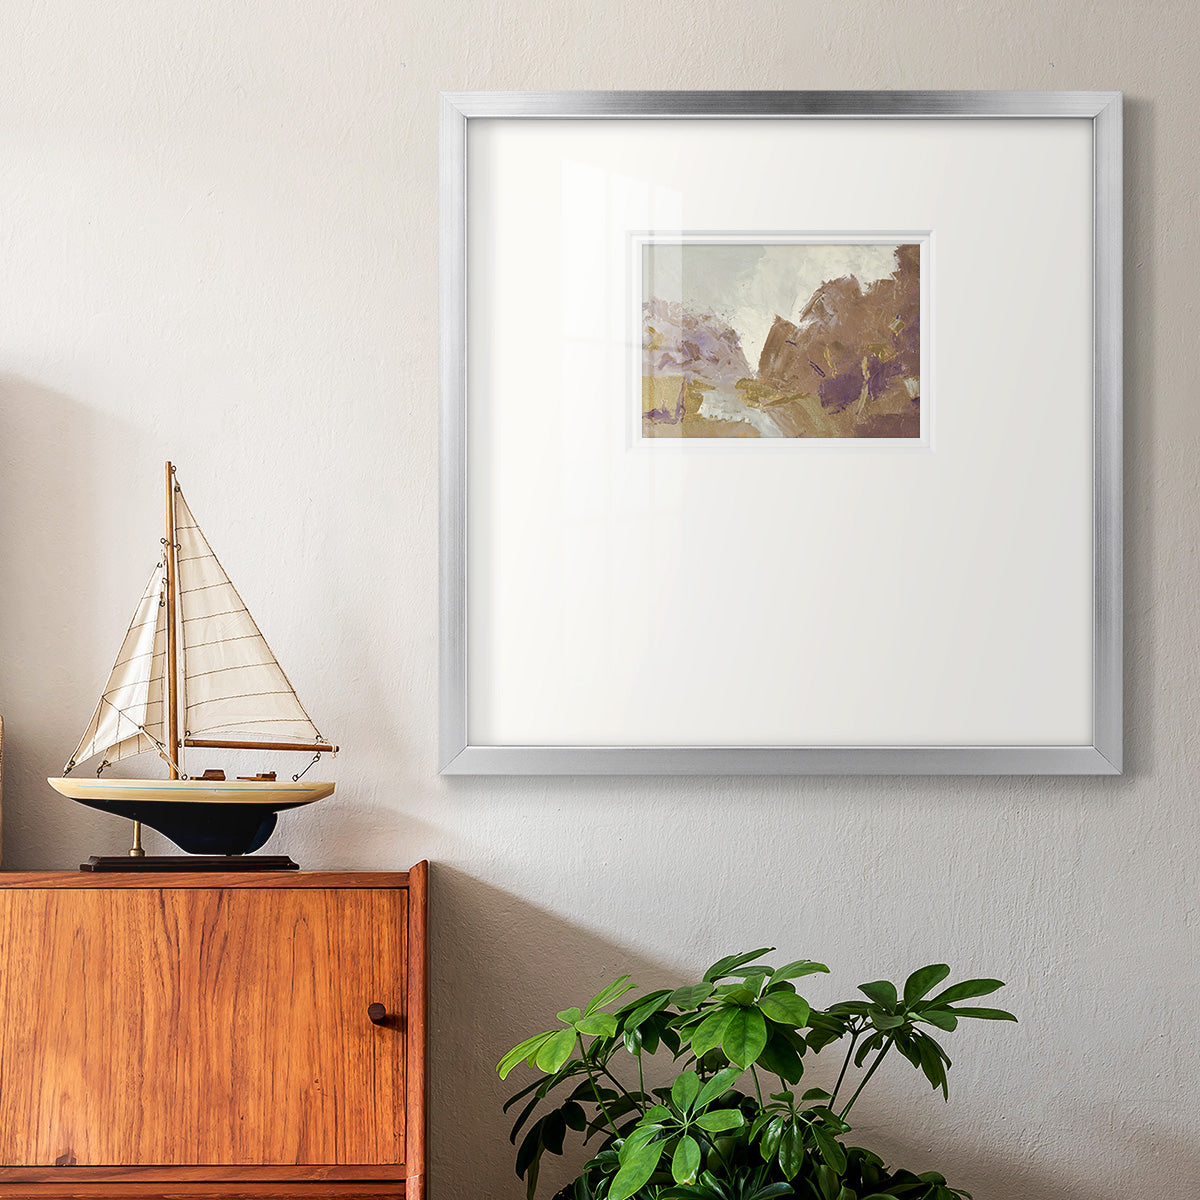 Fall Clearing Variation 2- Premium Framed Print Double Matboard